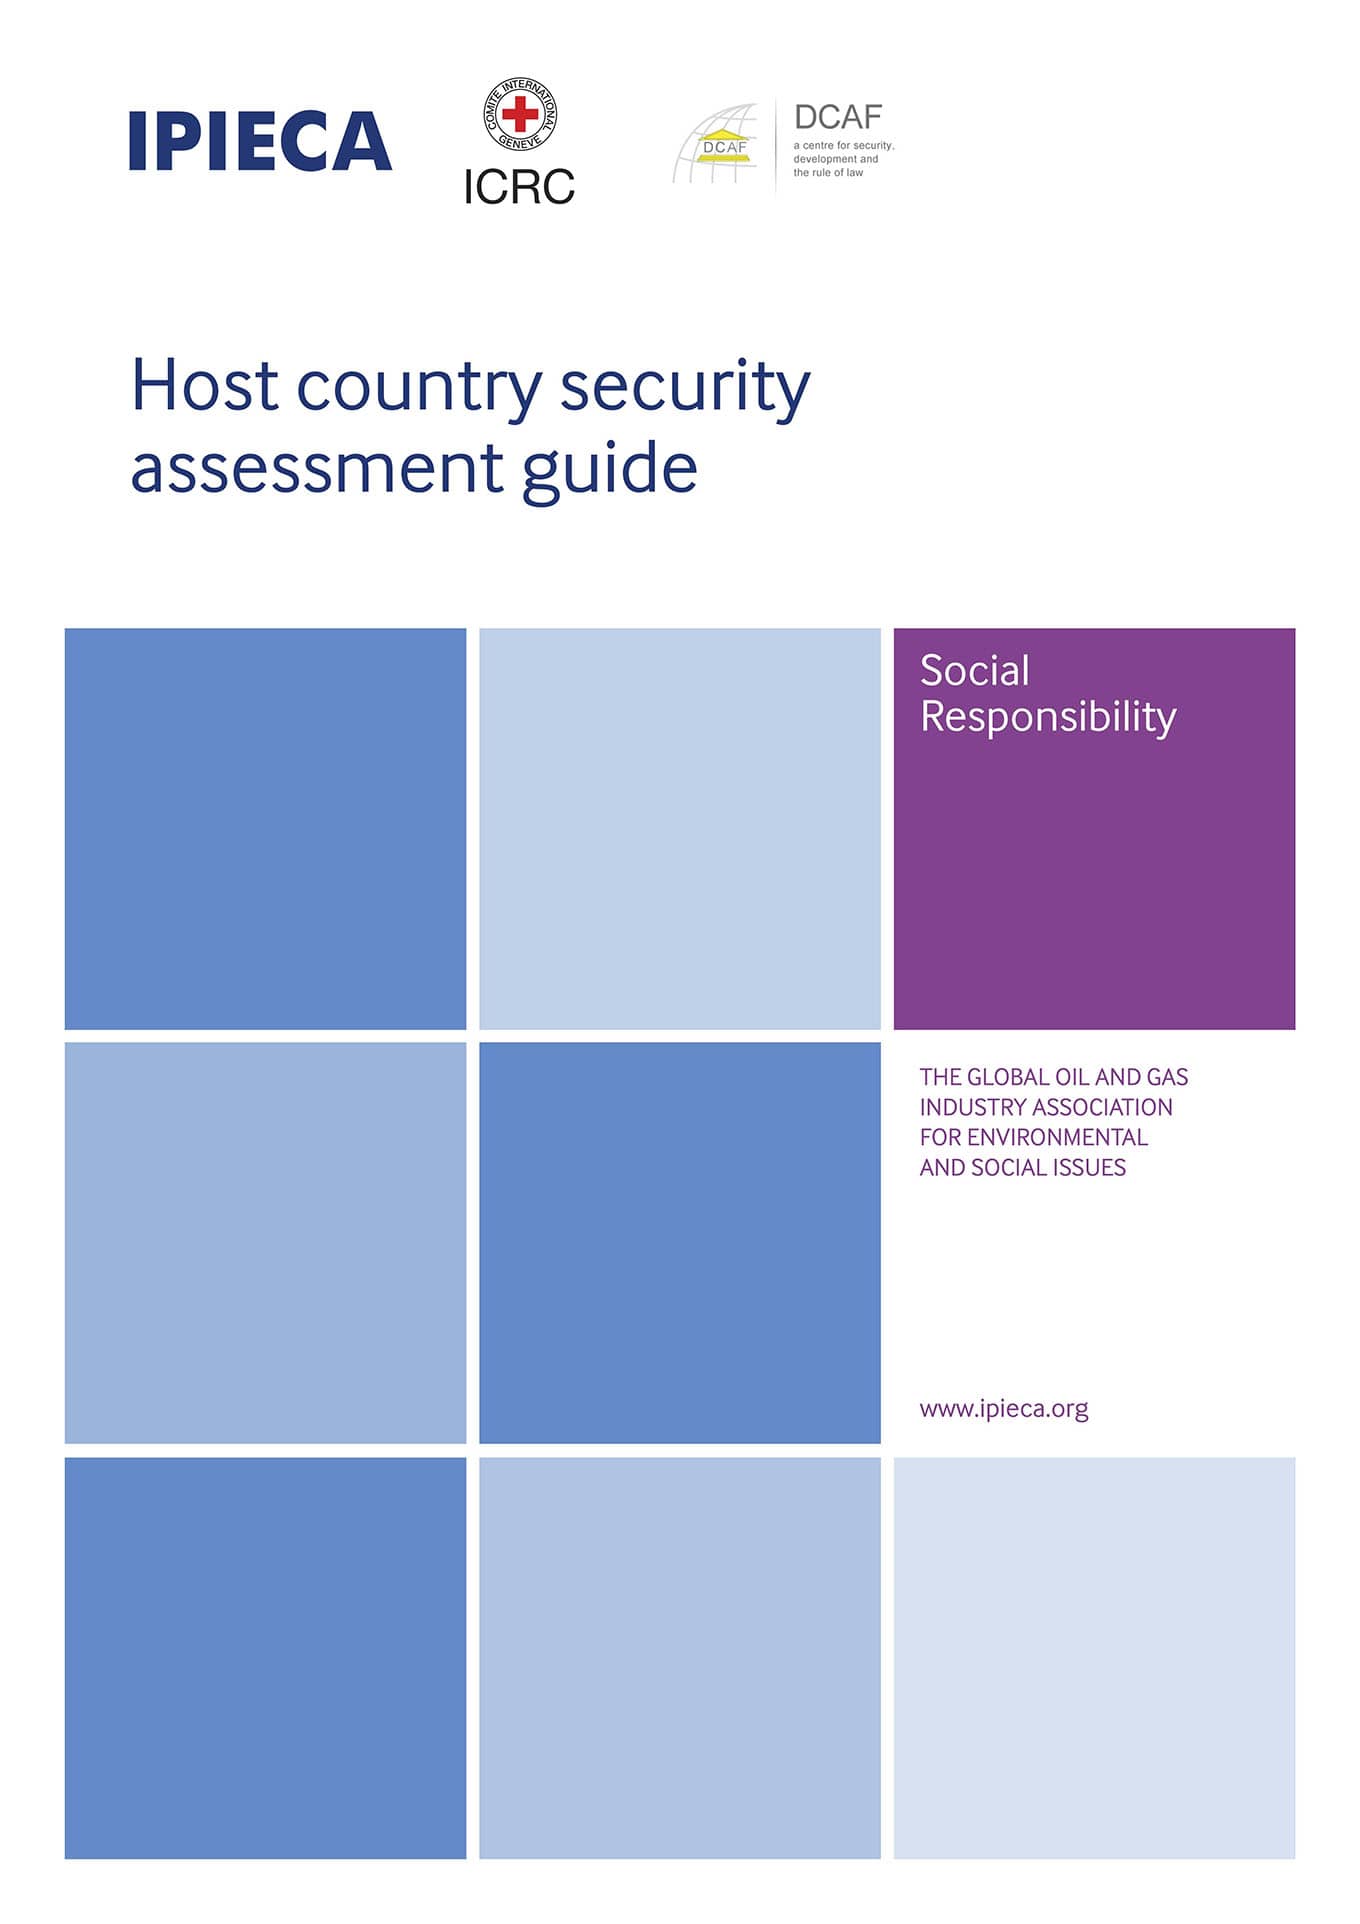 Host Country Security Assessment Guide (DCAF, ICRC and IPIECA, 2017)